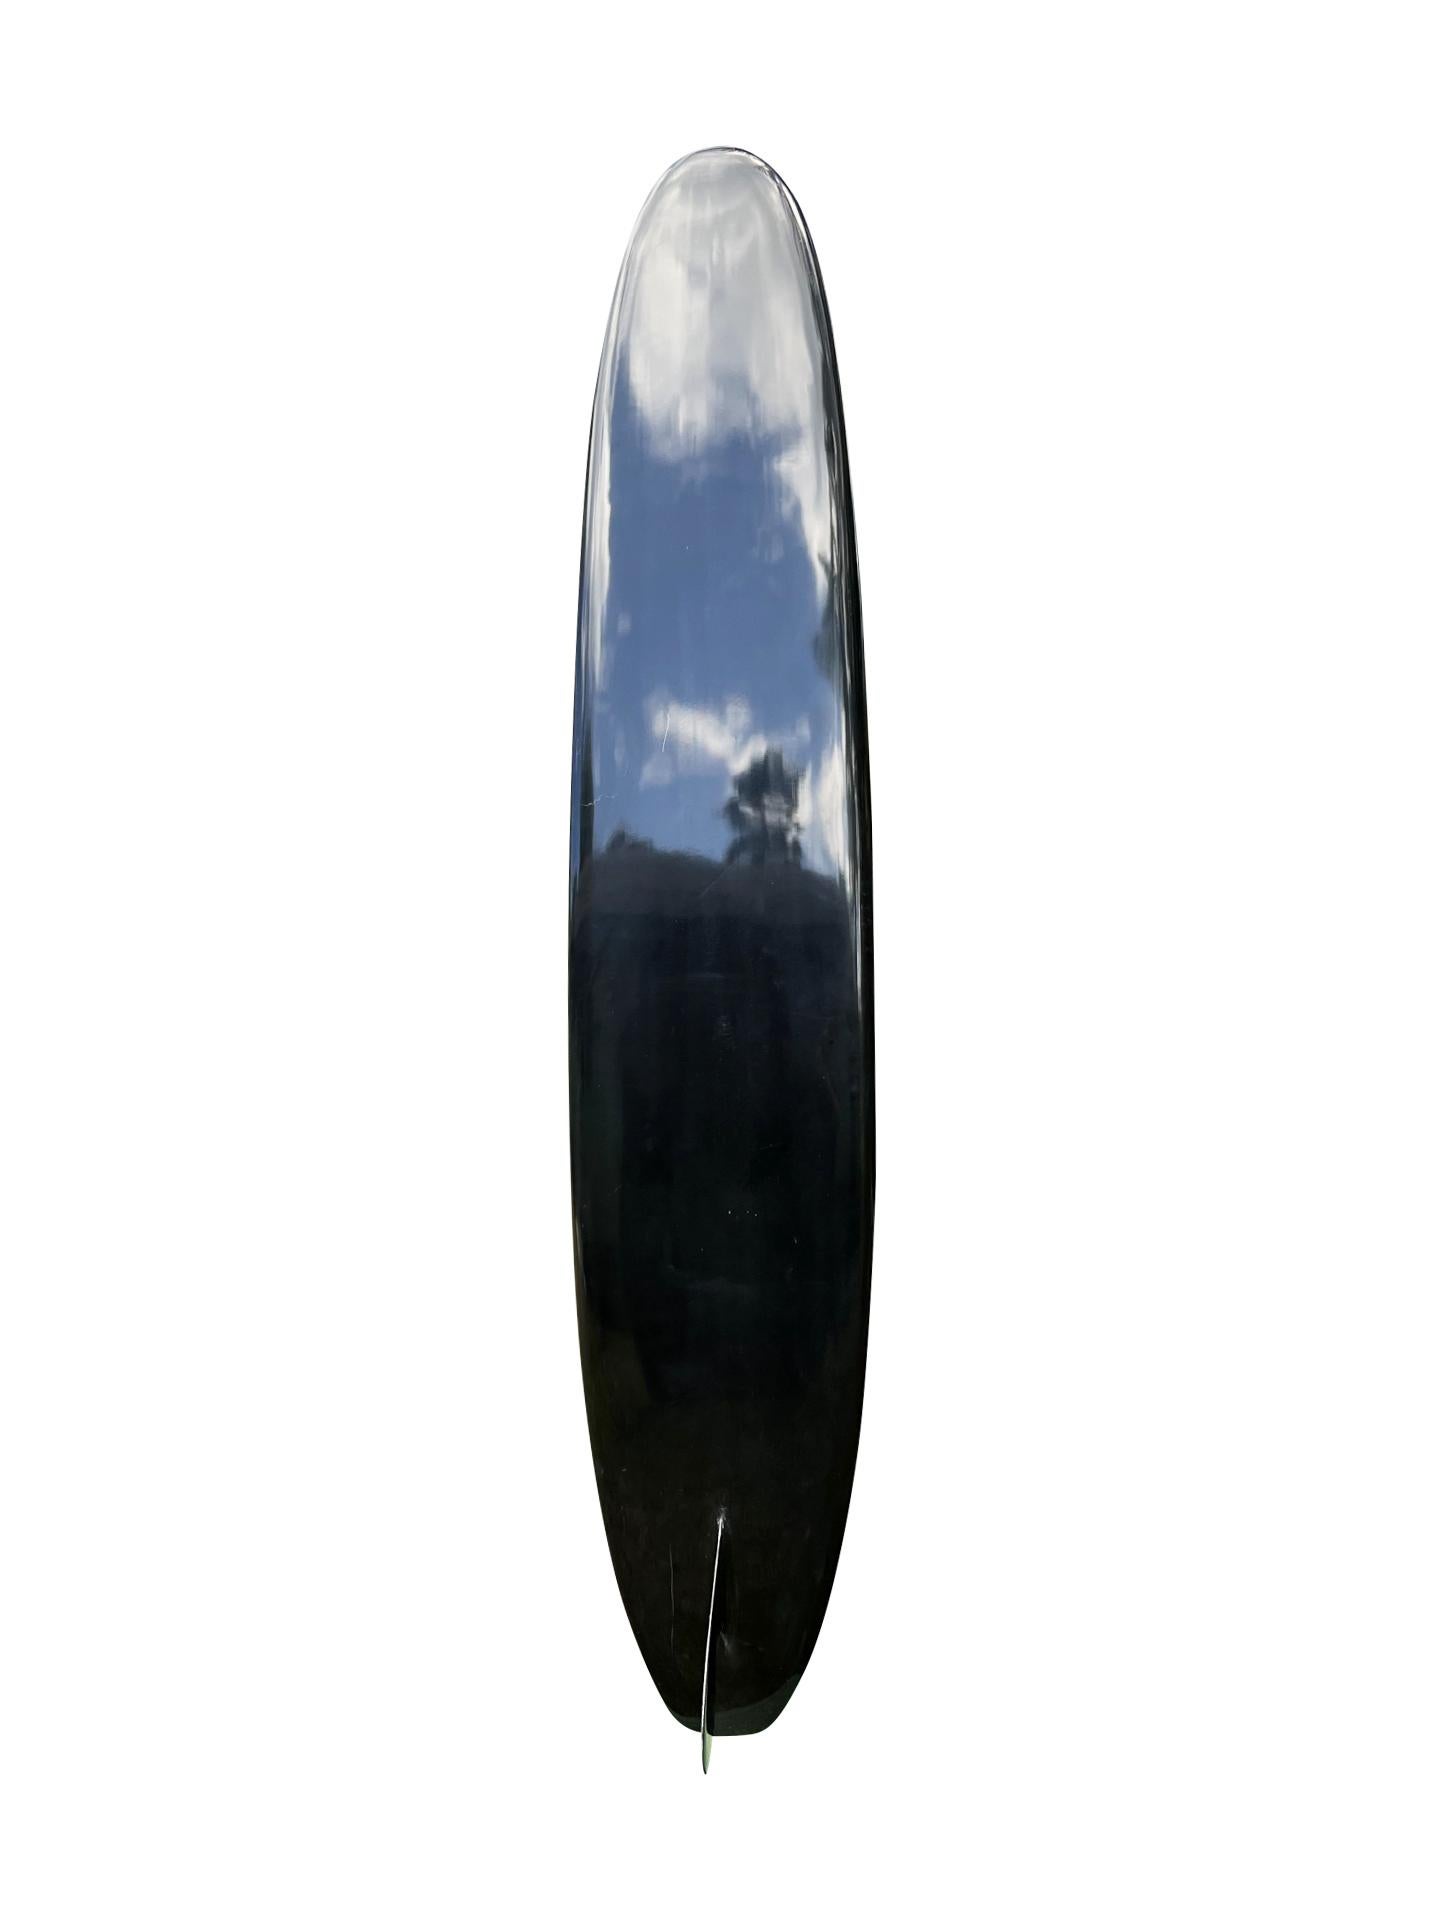 1966 Greg Noll Miki Dora ‘Da Cat’ longboard. Featuring the highly coveted 1st generation Da Cat longboard, known by it’s pronounced step deck and iconic glass-on ‘Da Cat’ style fin. Features the most prized black cat color, synonymous with the